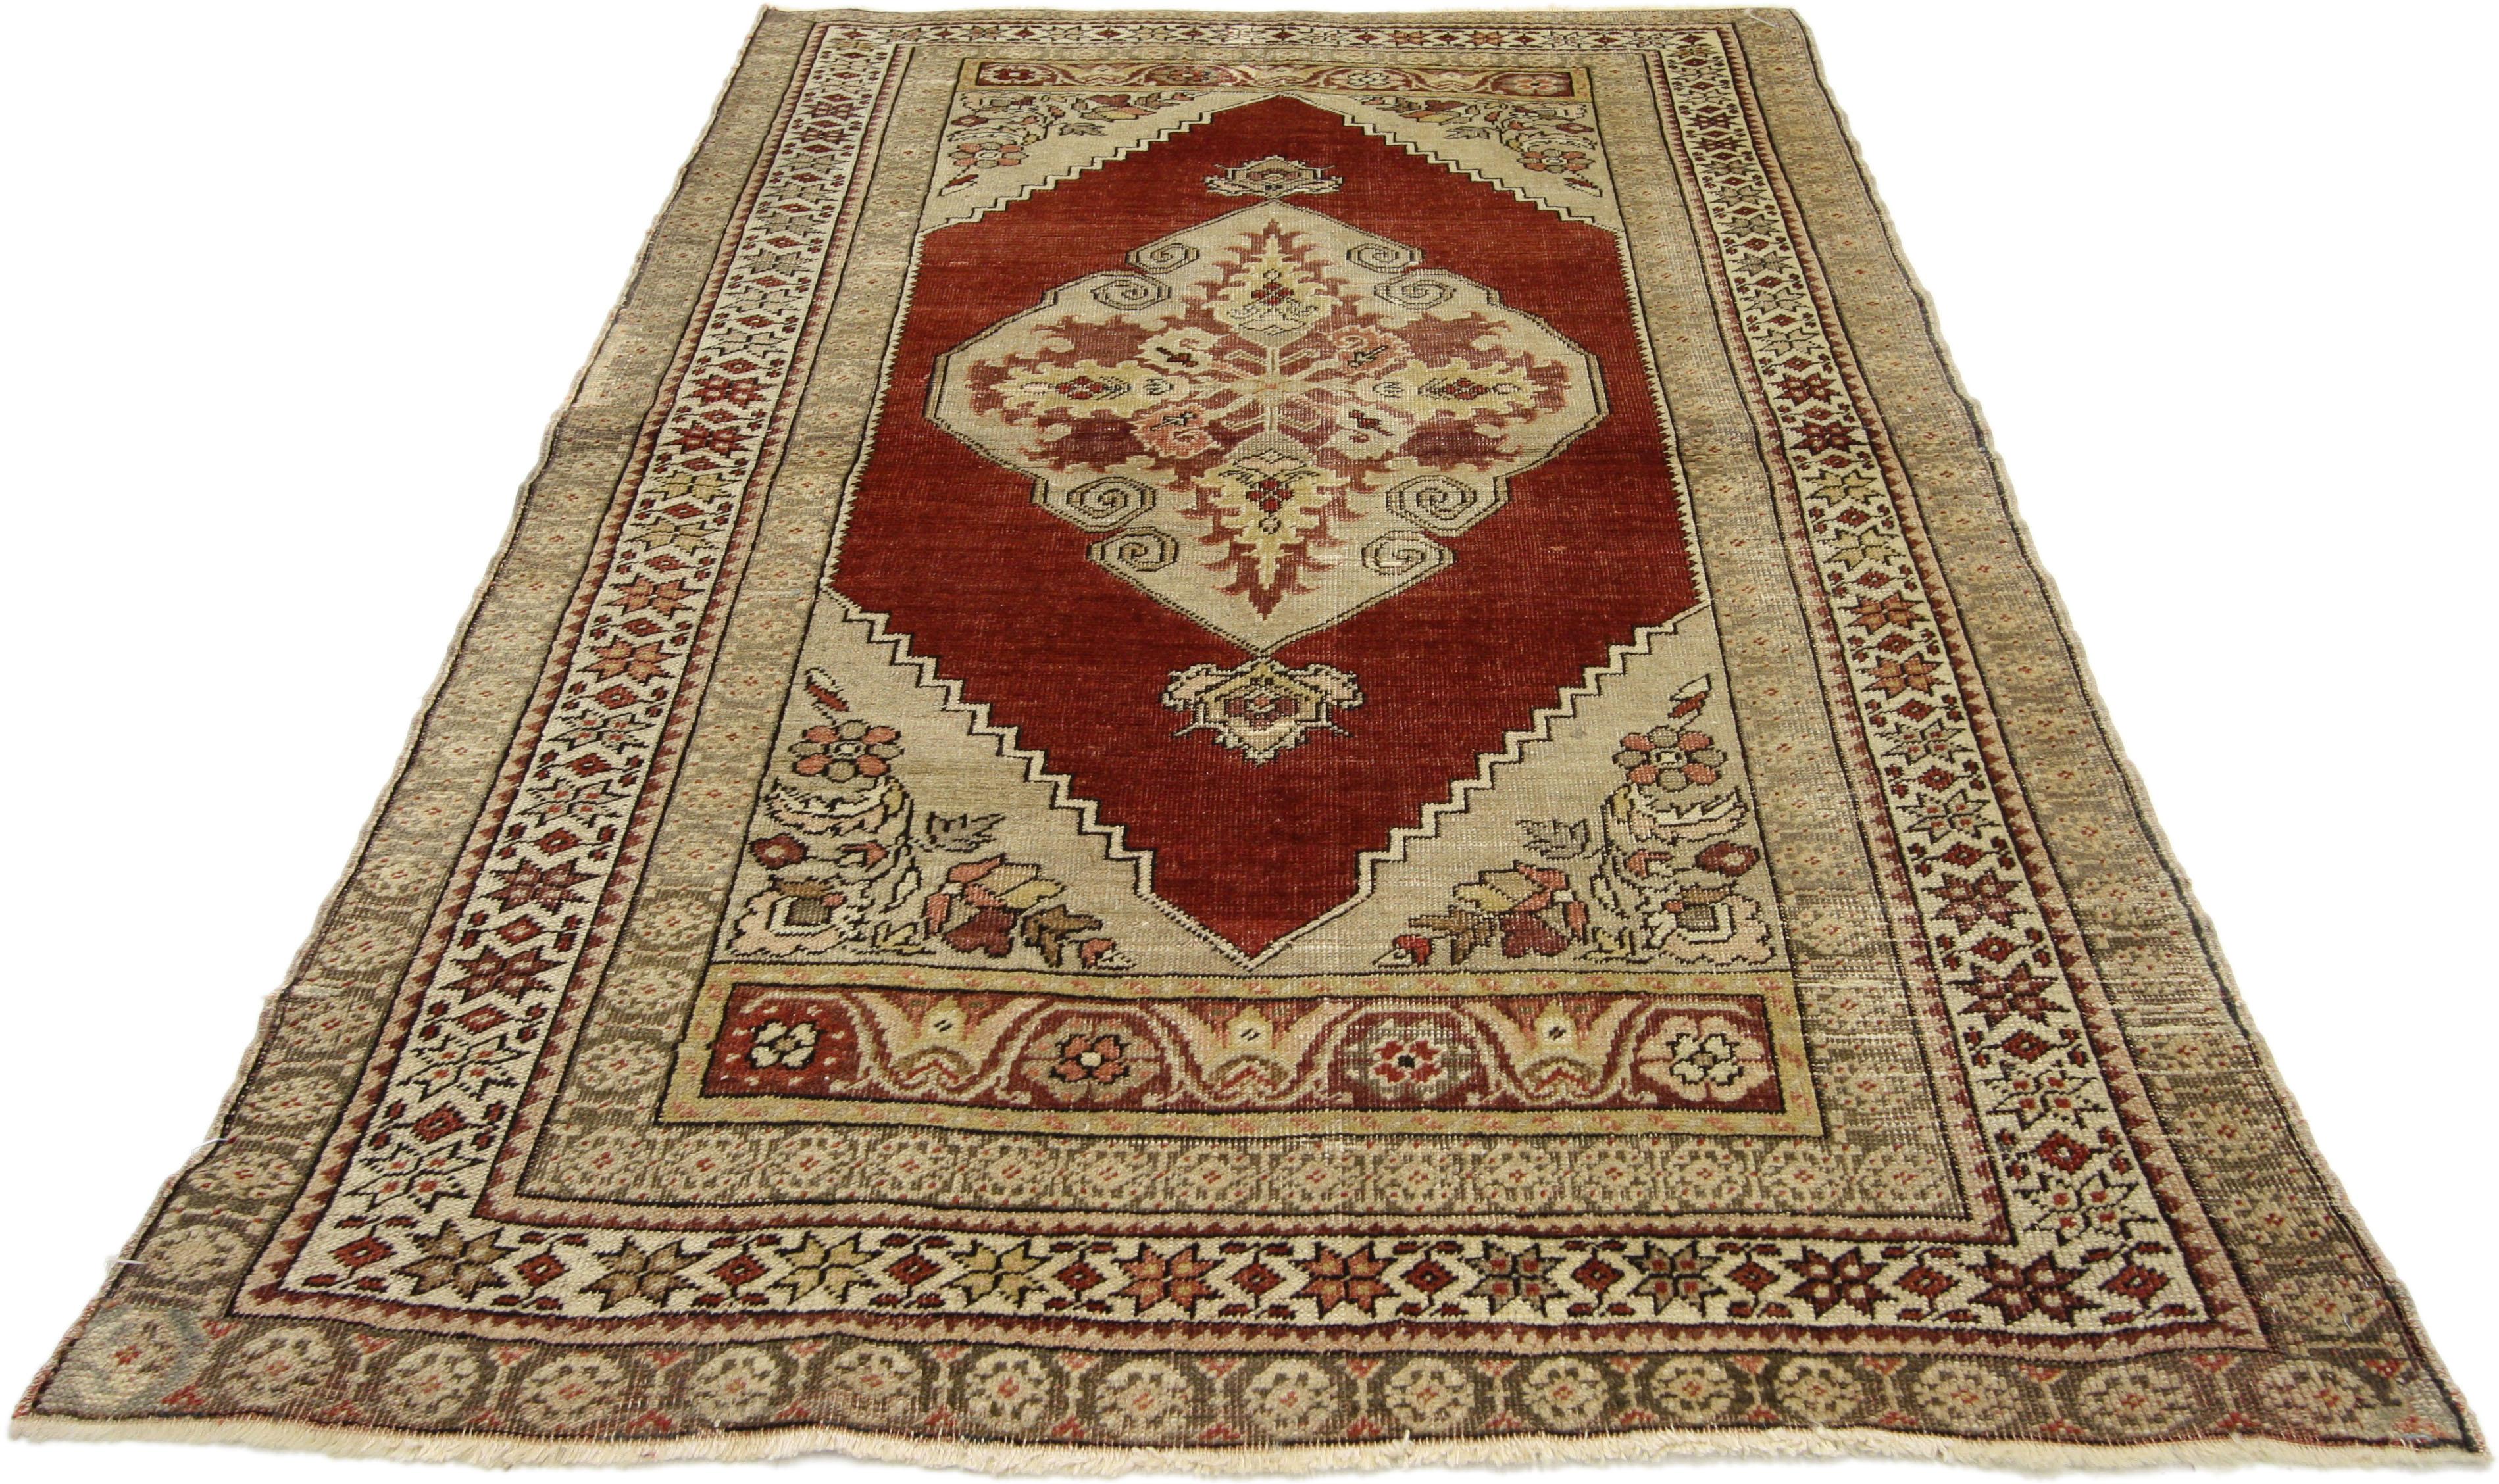 73649, vintage Turkish Oushak Accent rug, entry or foyer rug. This vintage Turkish Oushak rug features a modern traditional style. Immersed in Anatolian history and refined colors, this vintage Oushak rug combines simplicity with sophistication.